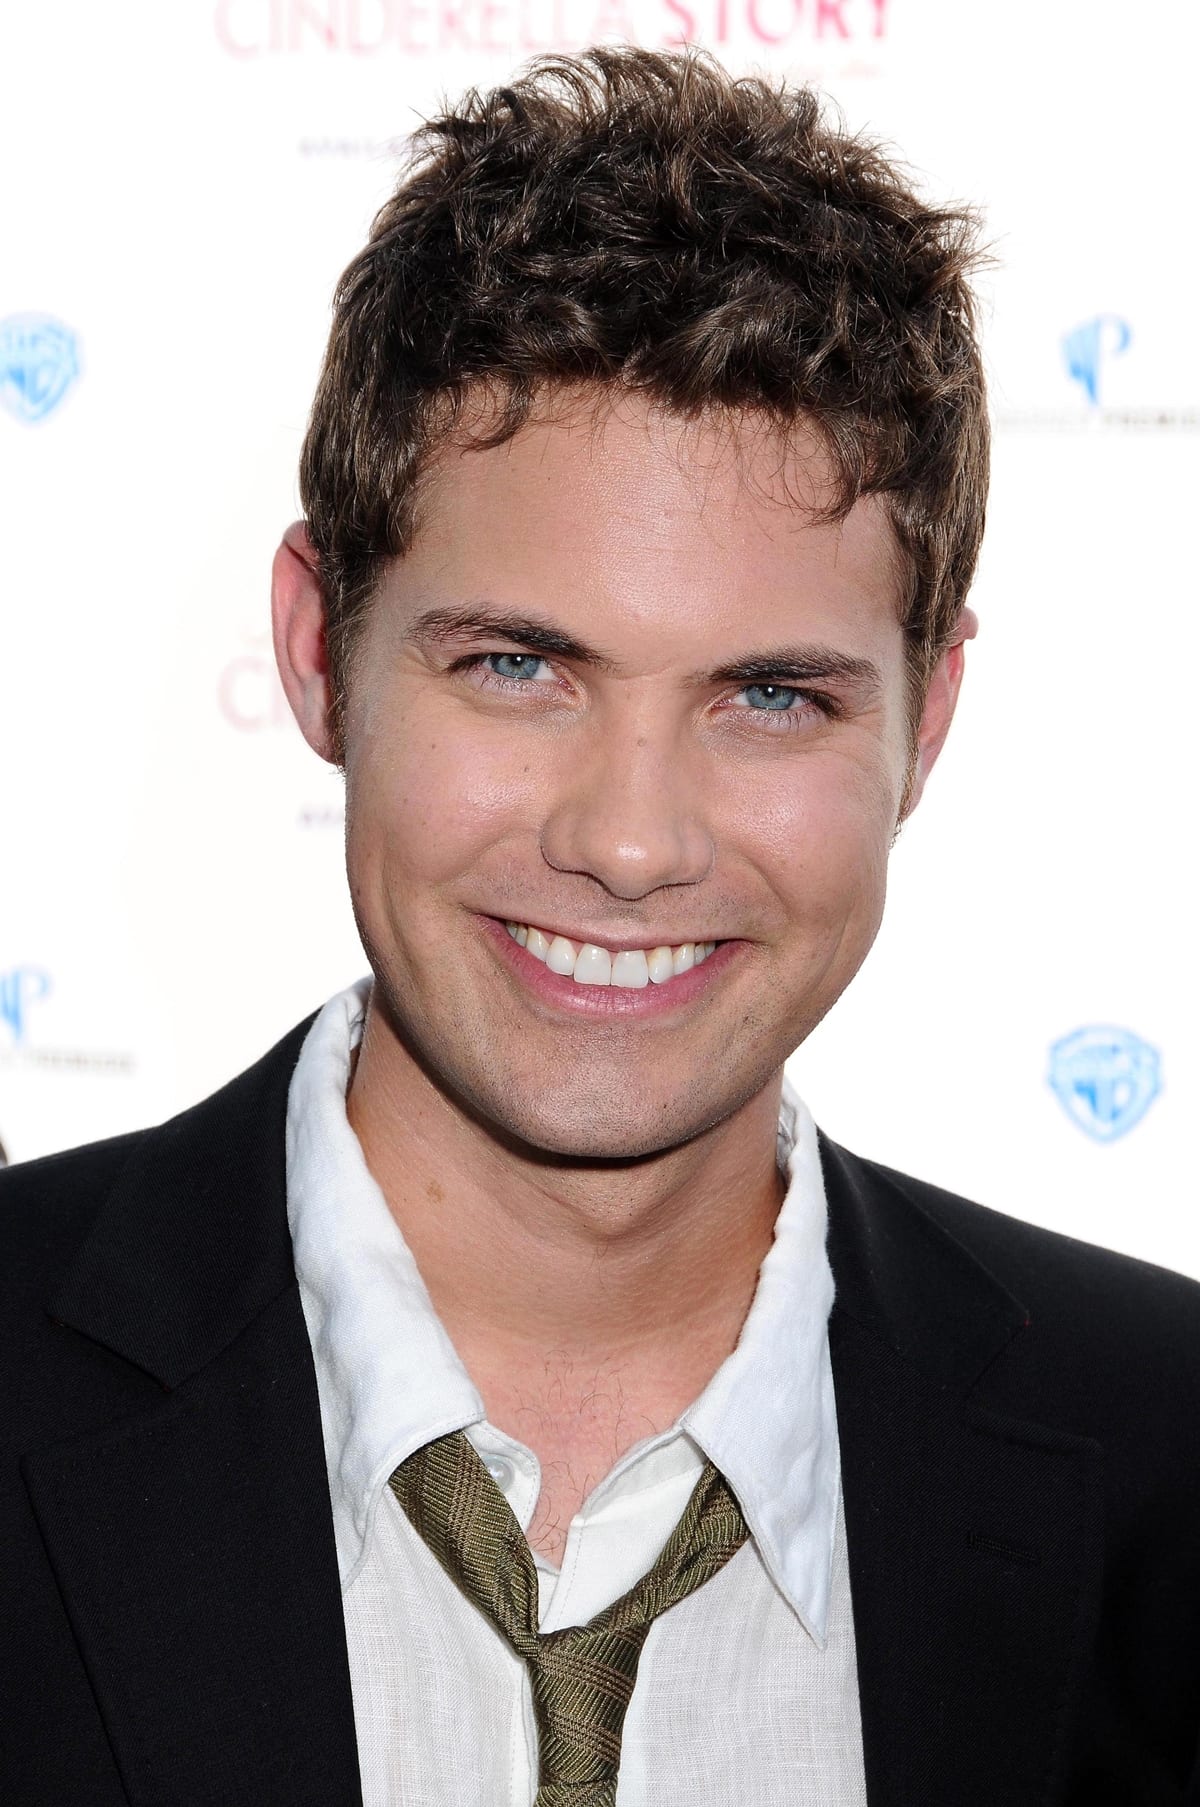 Canadian actor Drew Seeley attends the premiere of "Another Cinderella Story"